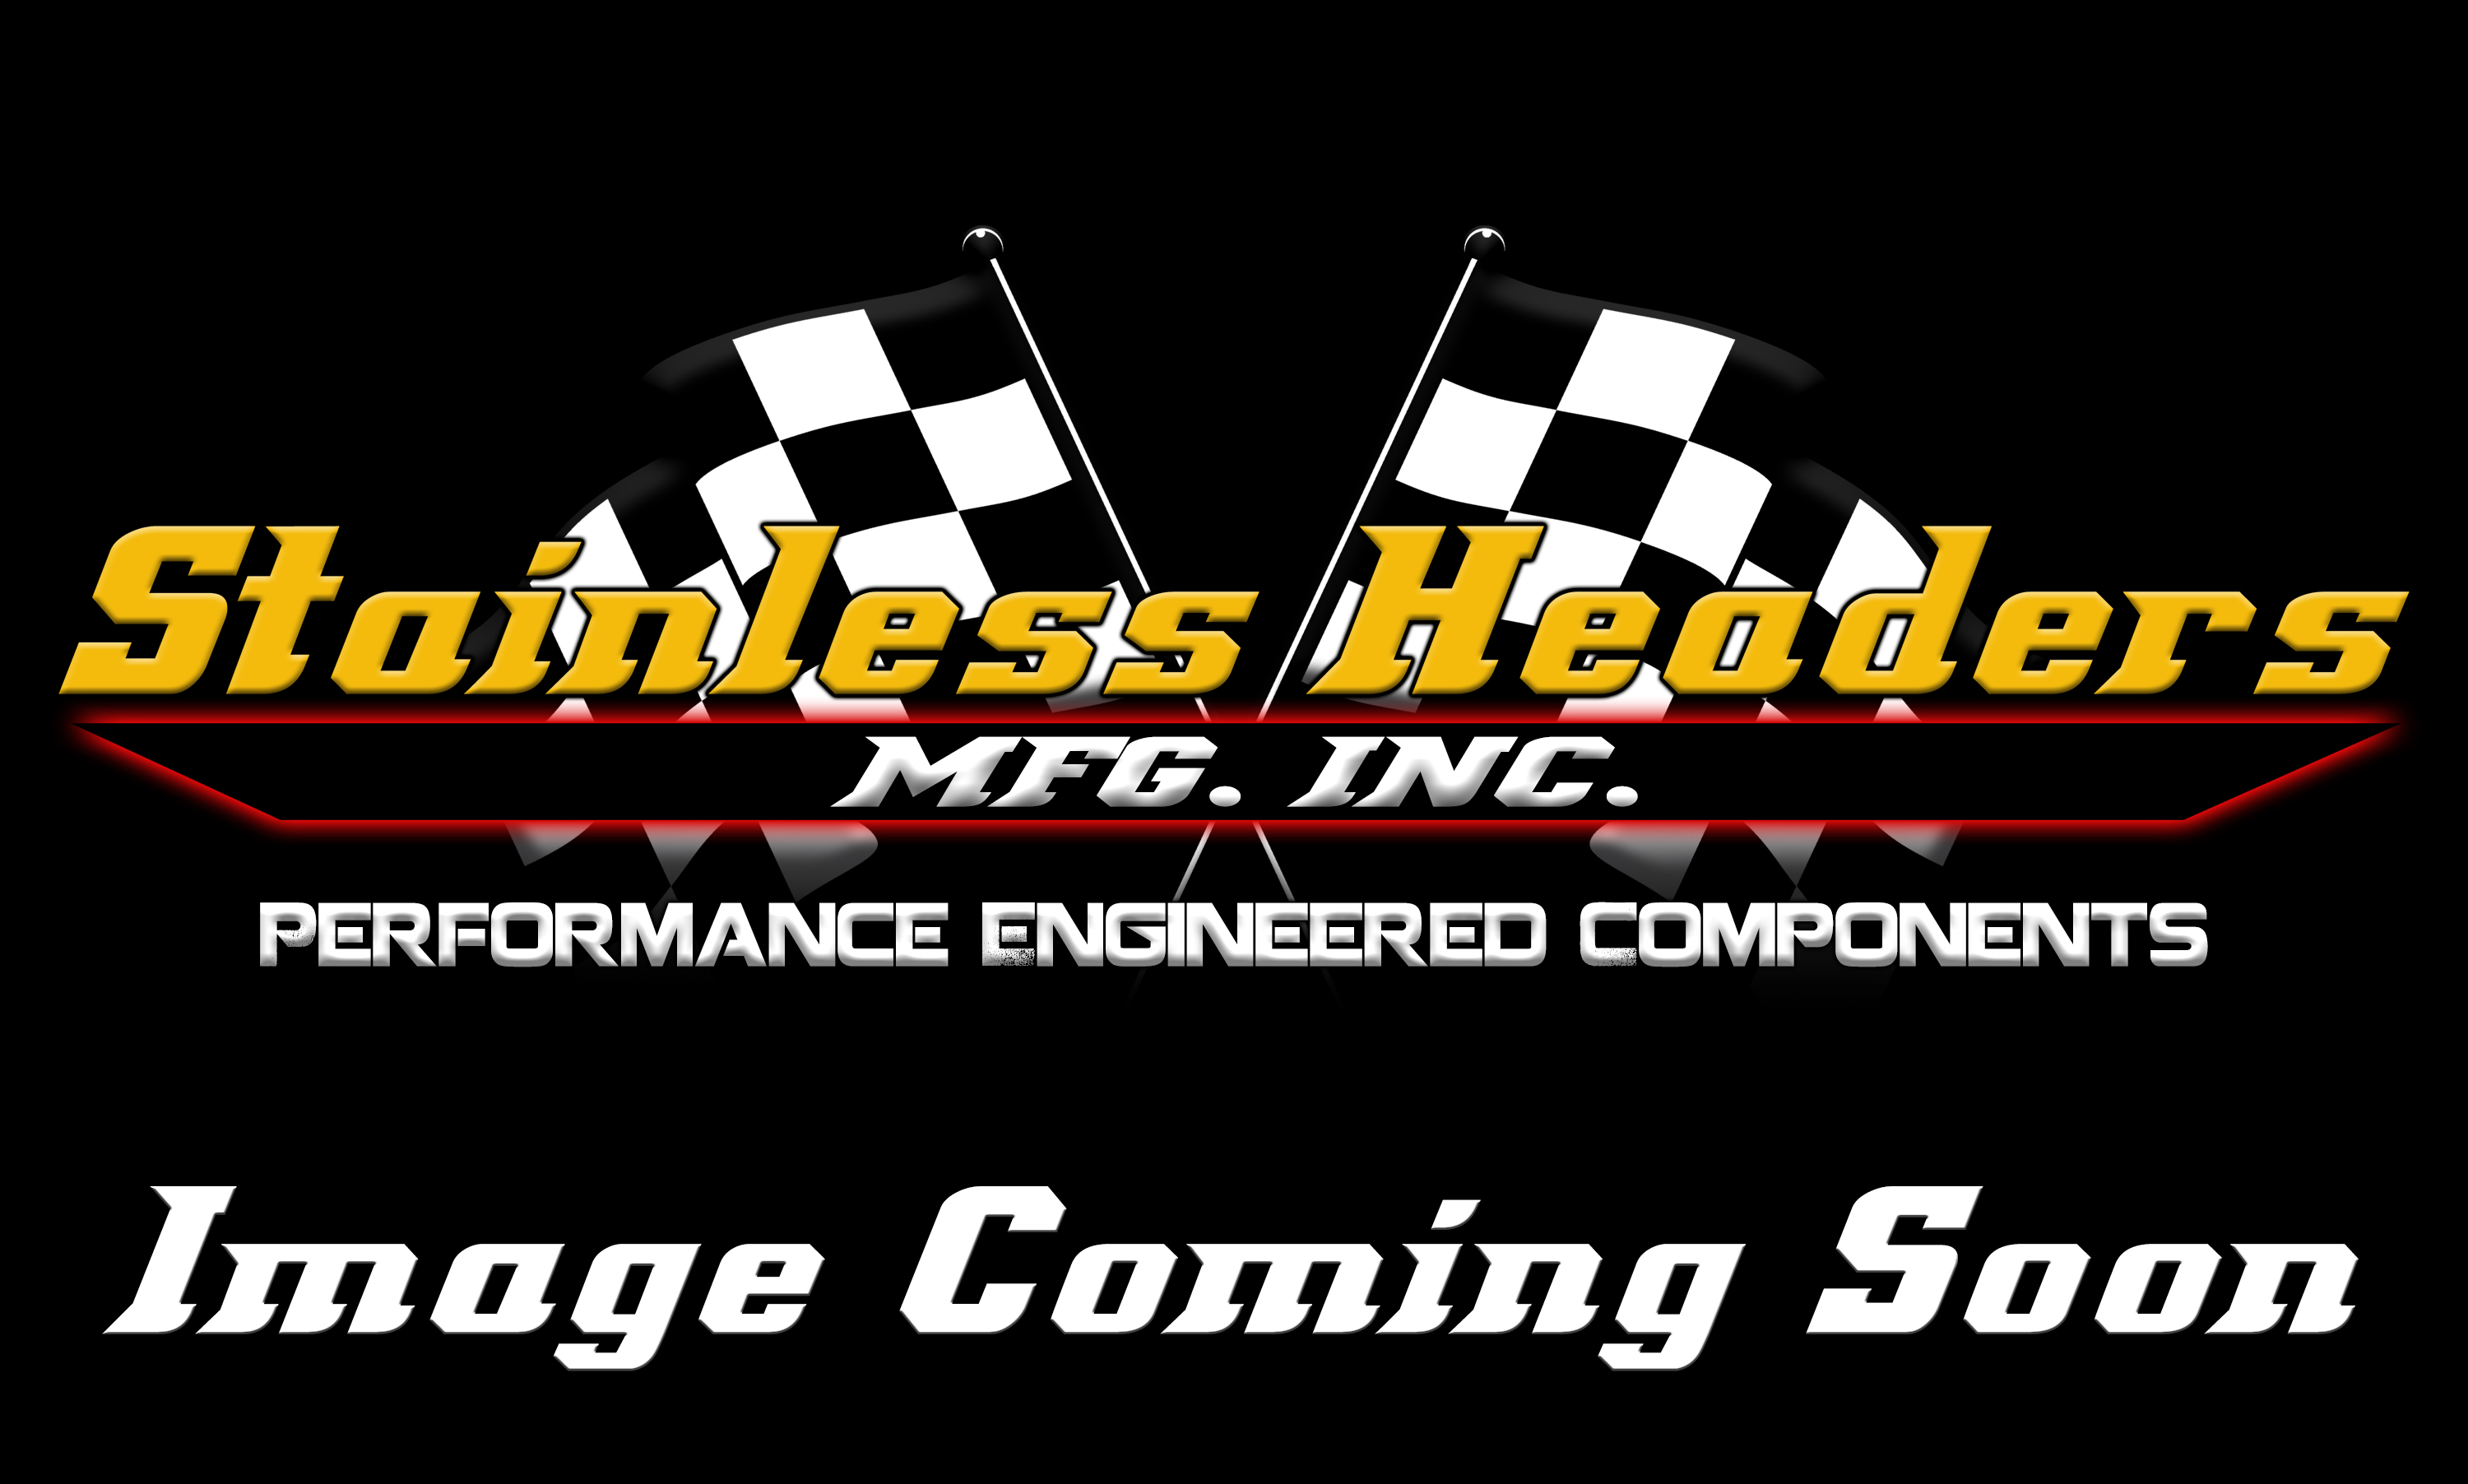 Stainless Headers - 5" Bore Space Big Block Chevy Turbo Manifold Build Kit - Image 3